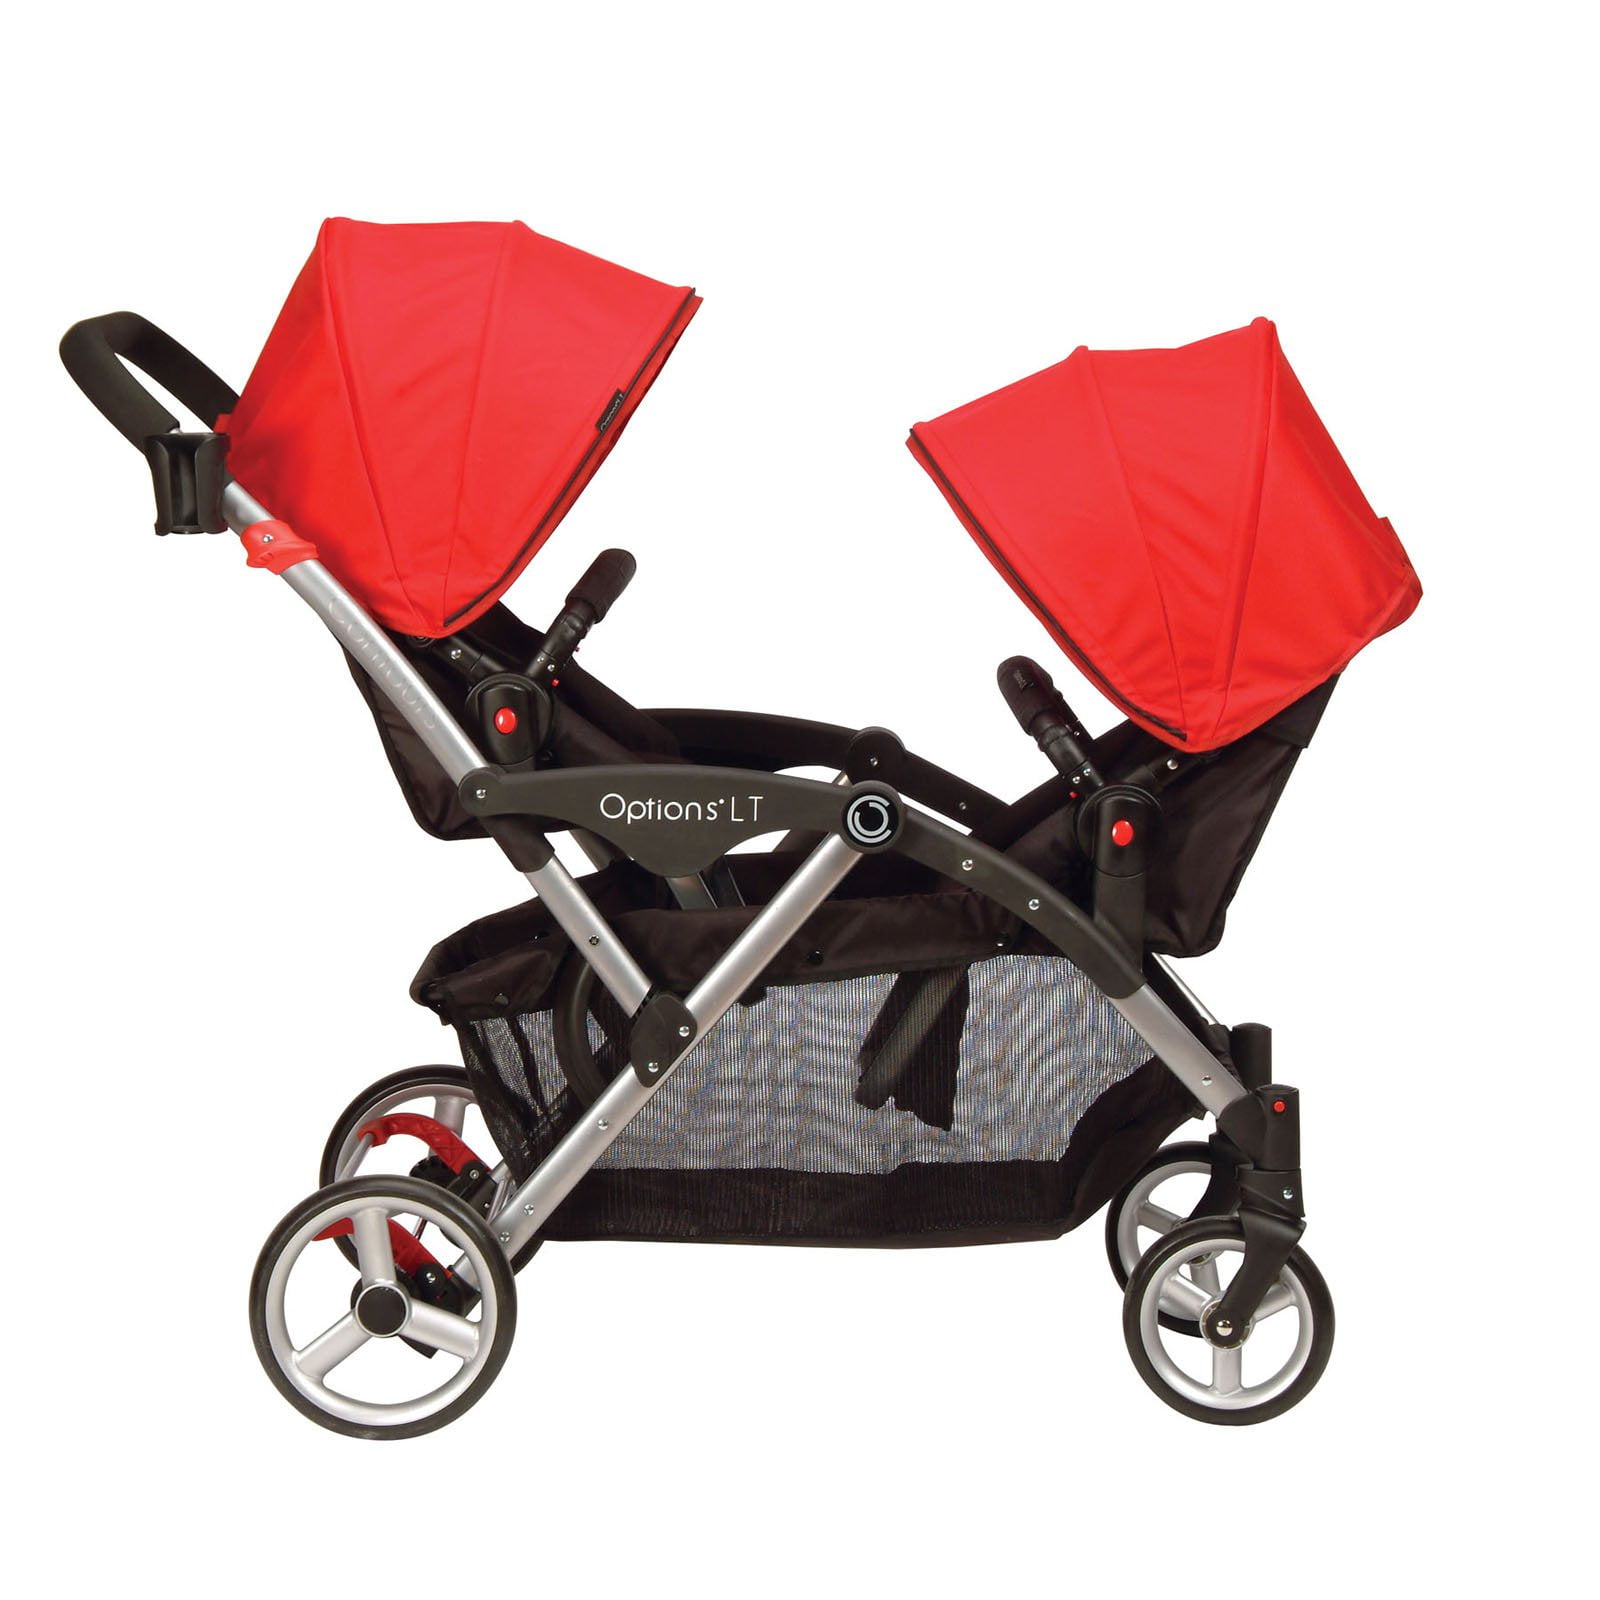 options lt double stroller red